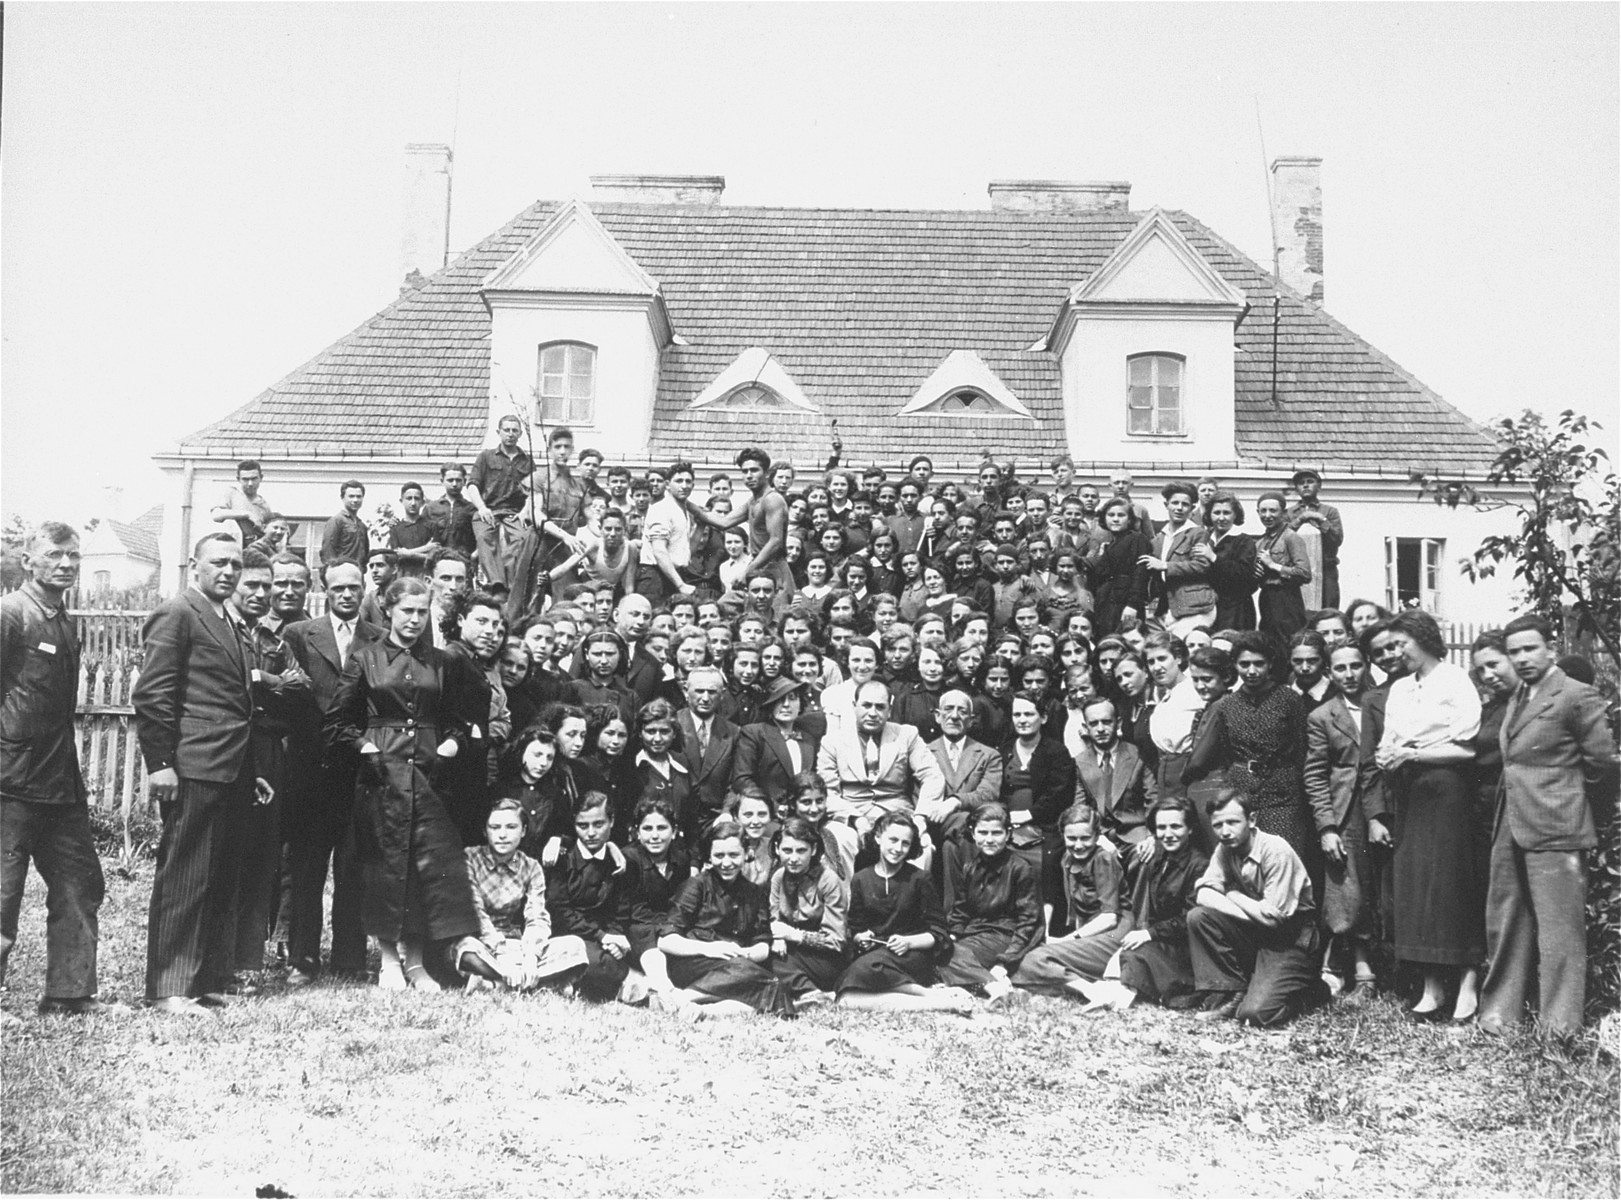 A group portrait of the teachers and students in the ORT school in Krzemieniec.